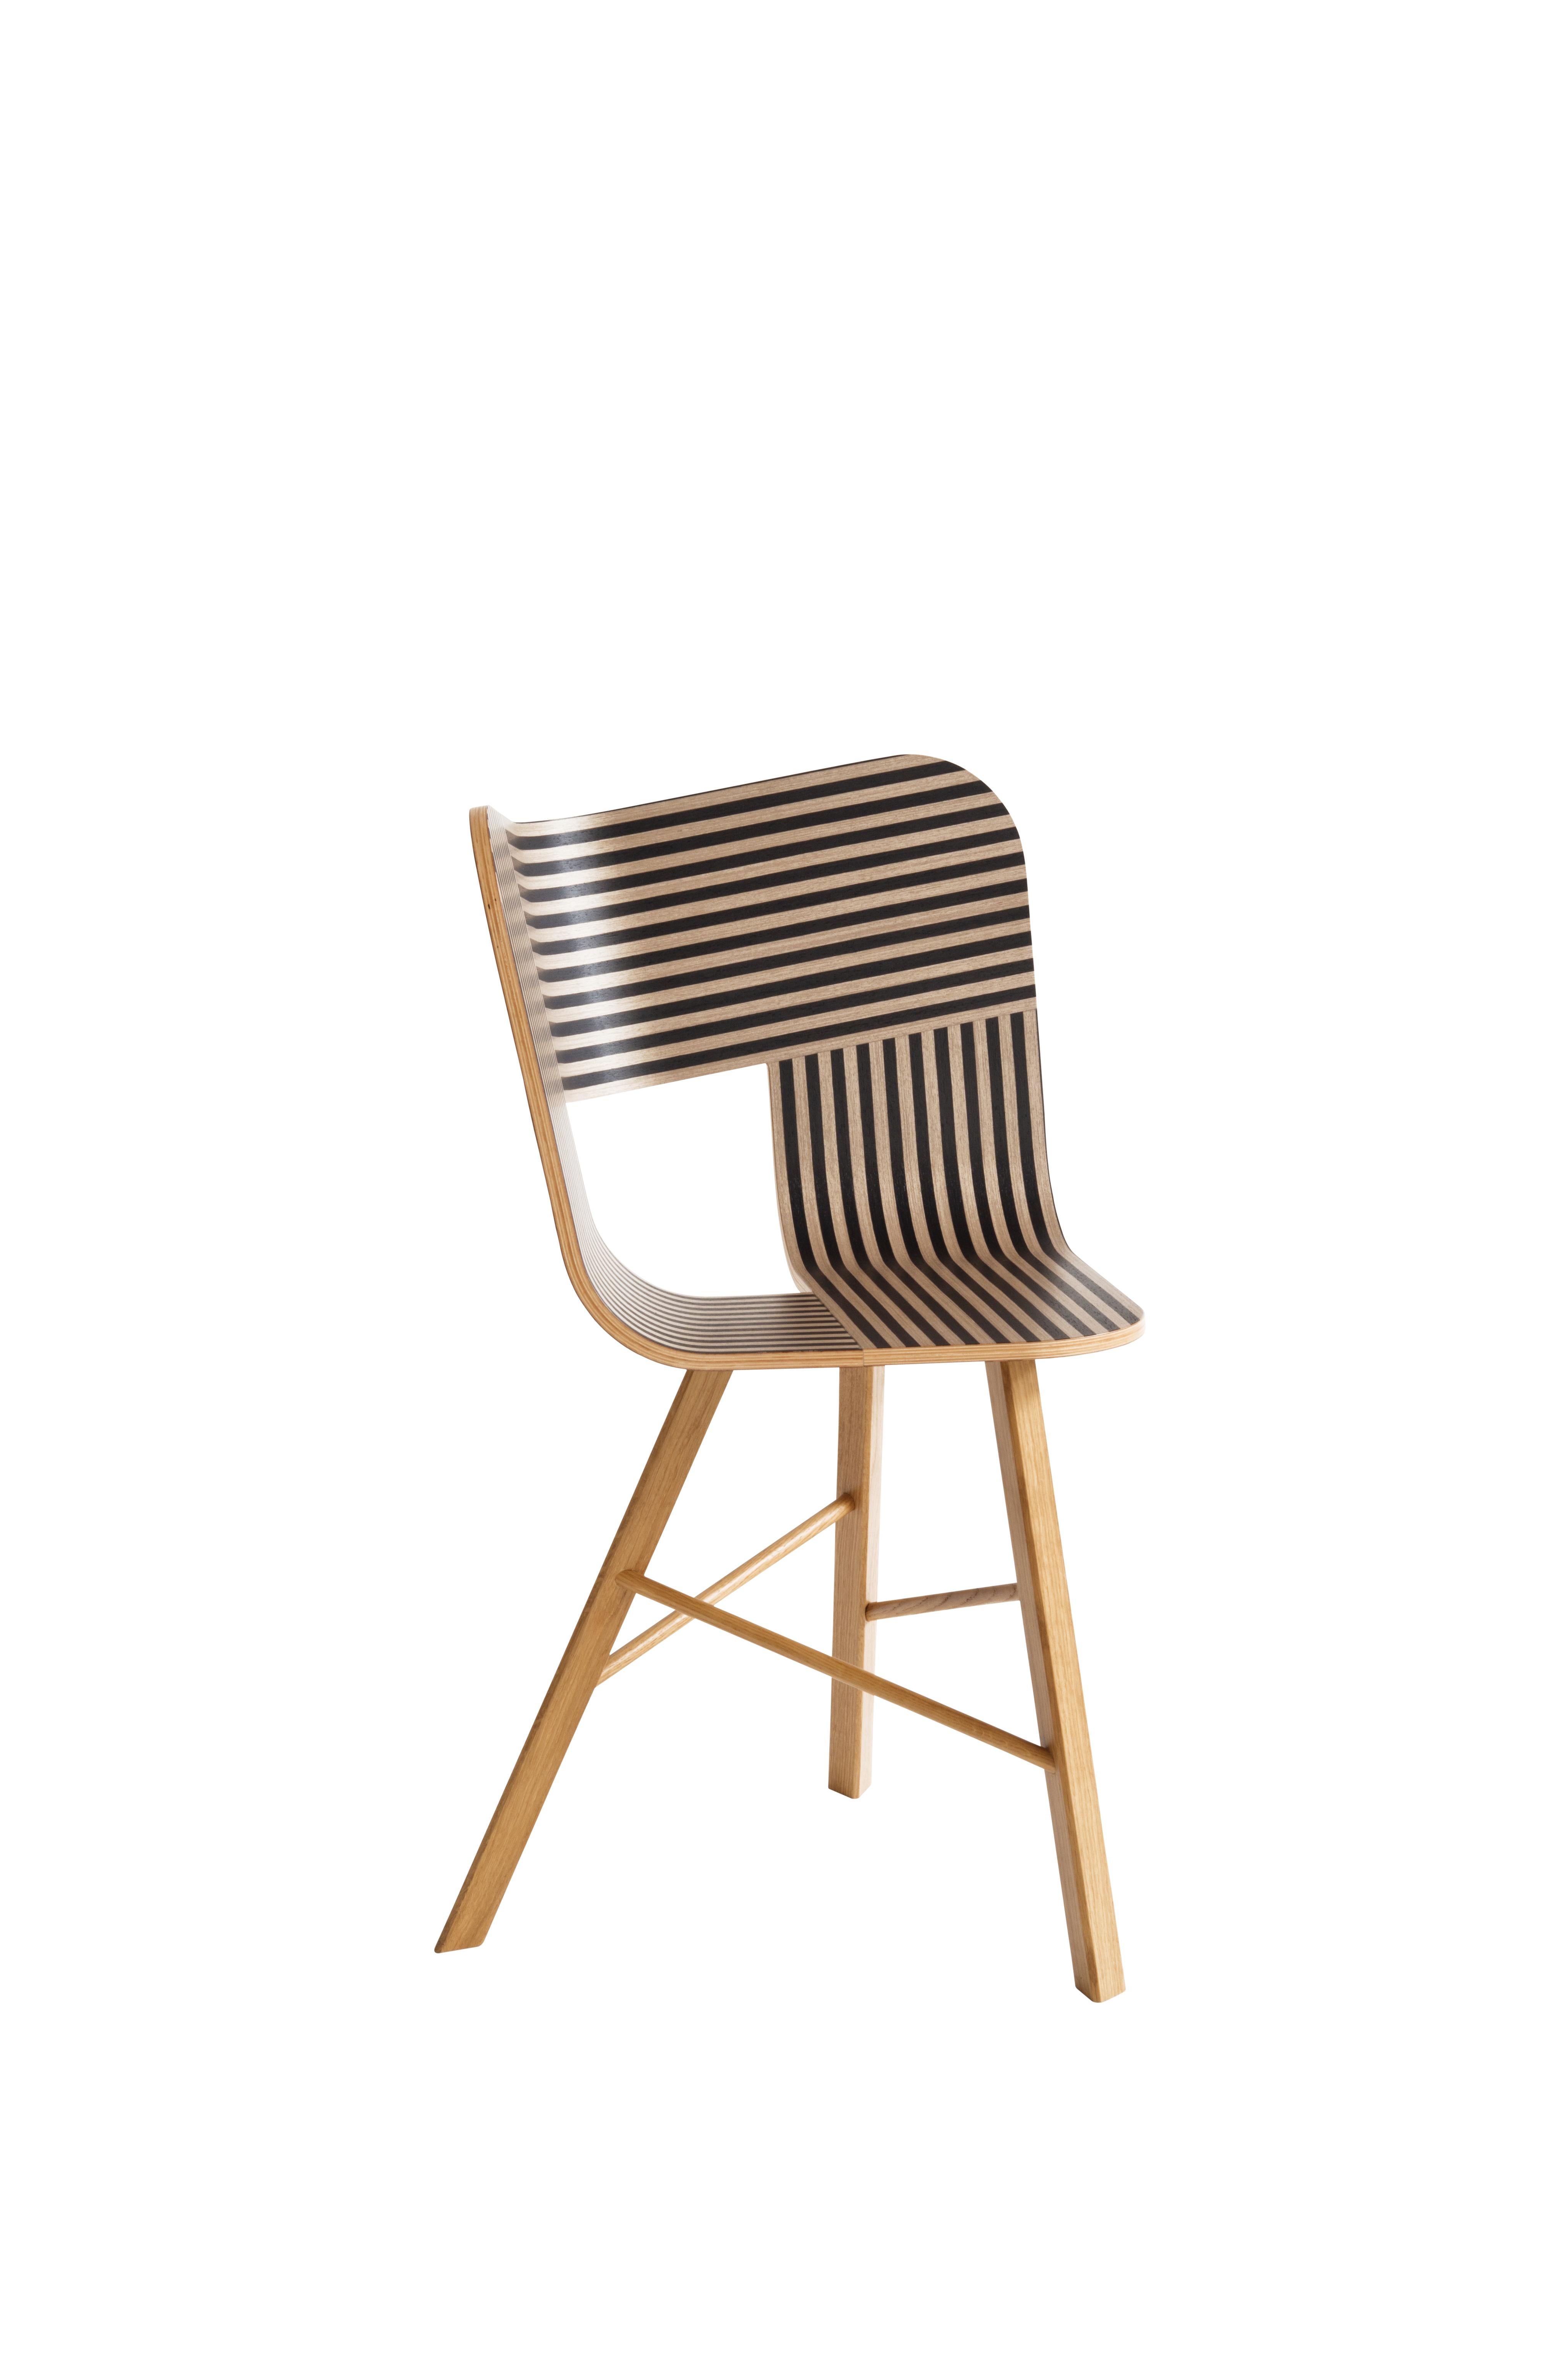 Modern Tria Wood 3 Legs Chair, Striped Seat Ivory and Black by Colé Italia For Sale